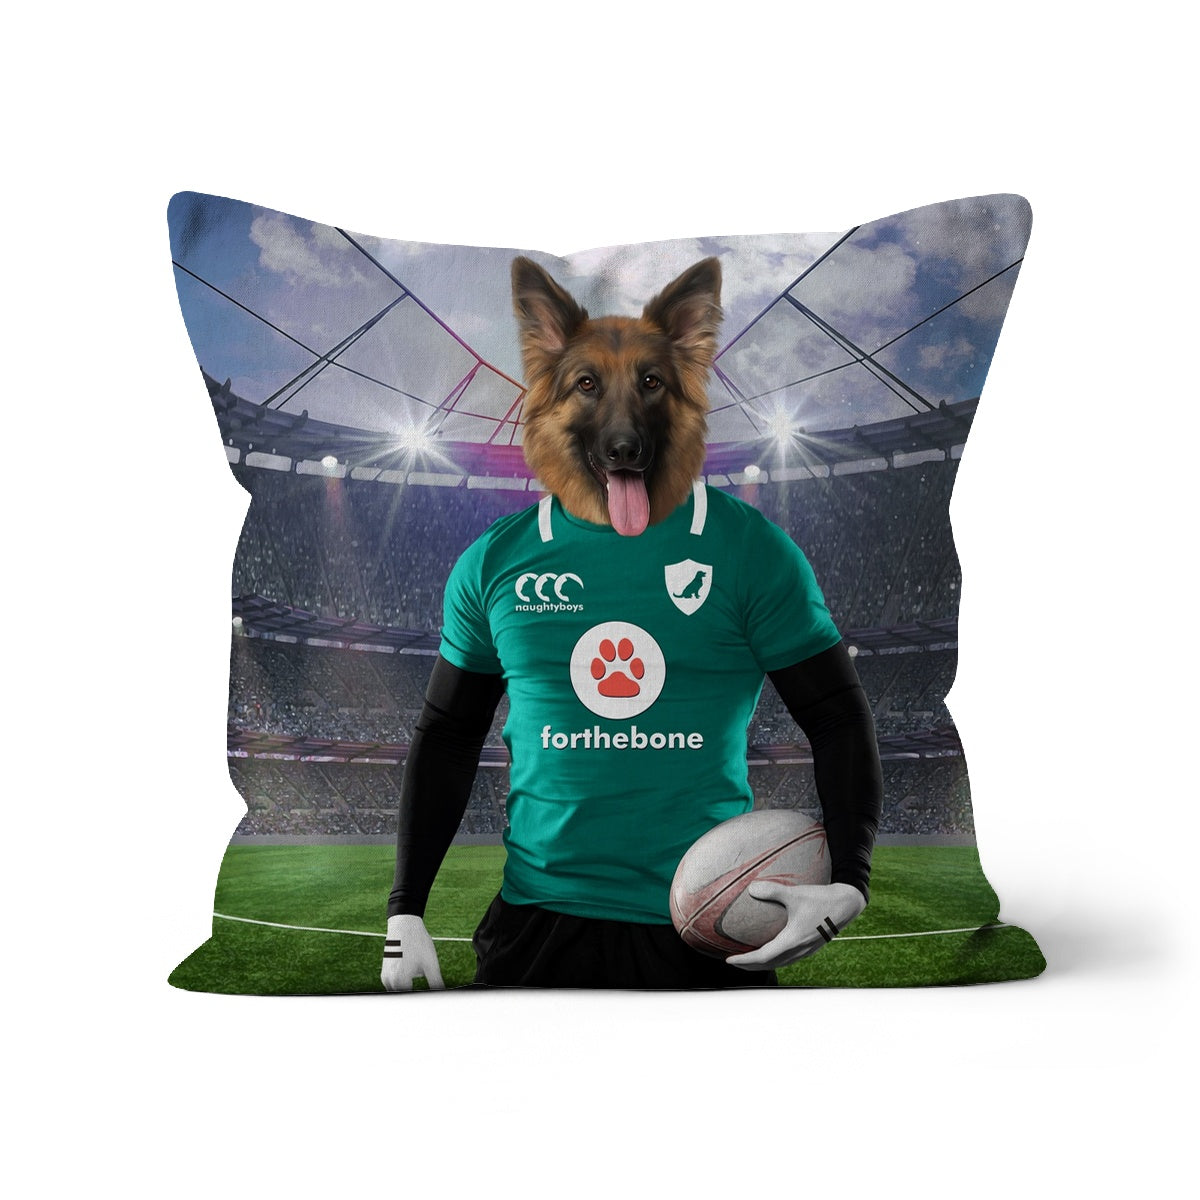 Ireland Rugby Team: Paw & Glory, paw and glory, pet pillow, pillow custom, Pet Portraits cushion, dog pillow custom, custom pet pillows, create your own pillow, customized throw pillows